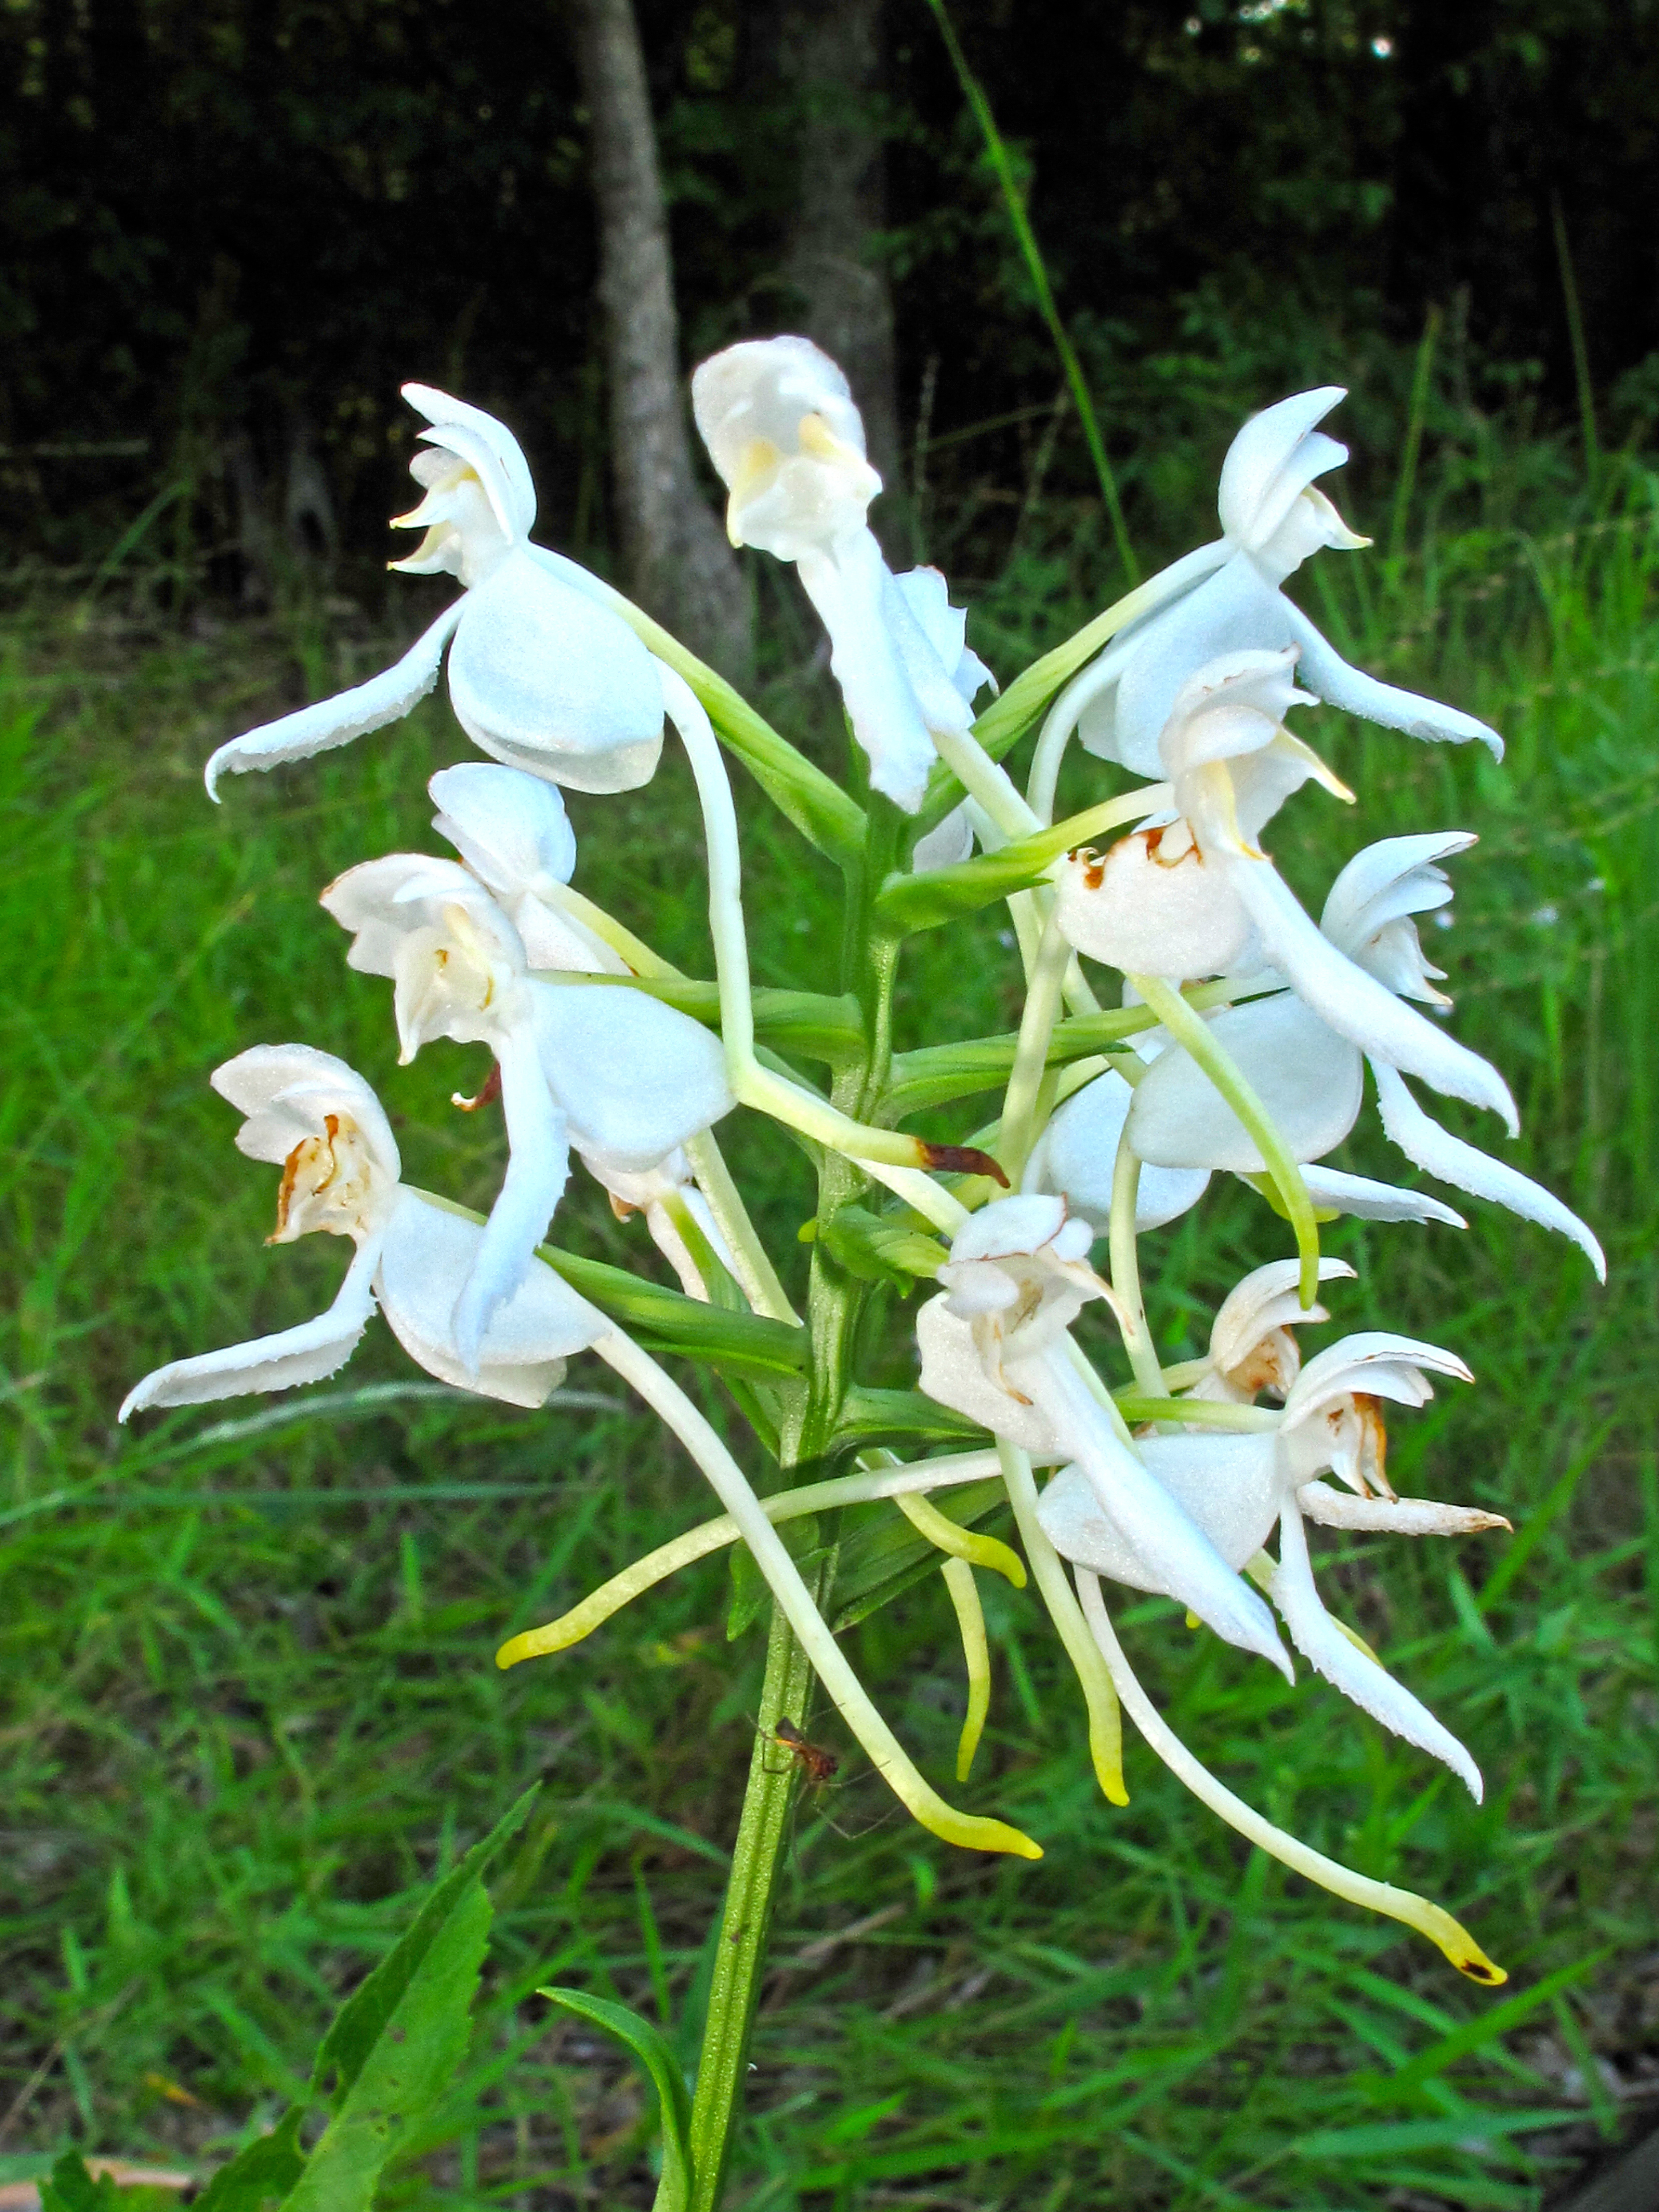 The white fringeless orchid (Platanthera integrilabia, also known as monkeyface orchid) has been a candidate for listing under the Endangered Species Act since 1980 due to various threats, including habitat modifications like logging operations, residential and commercial construction, and road projects, according to NatureServe Explorer. However, a final listing determination has not been made because other listing actions, such as court-approved settlements and emergency listing determinations, remain a higher priority. Though it was reviewed as part of this assessment, no changes in its designated global threat level were made. | Photo by Alan Cressler